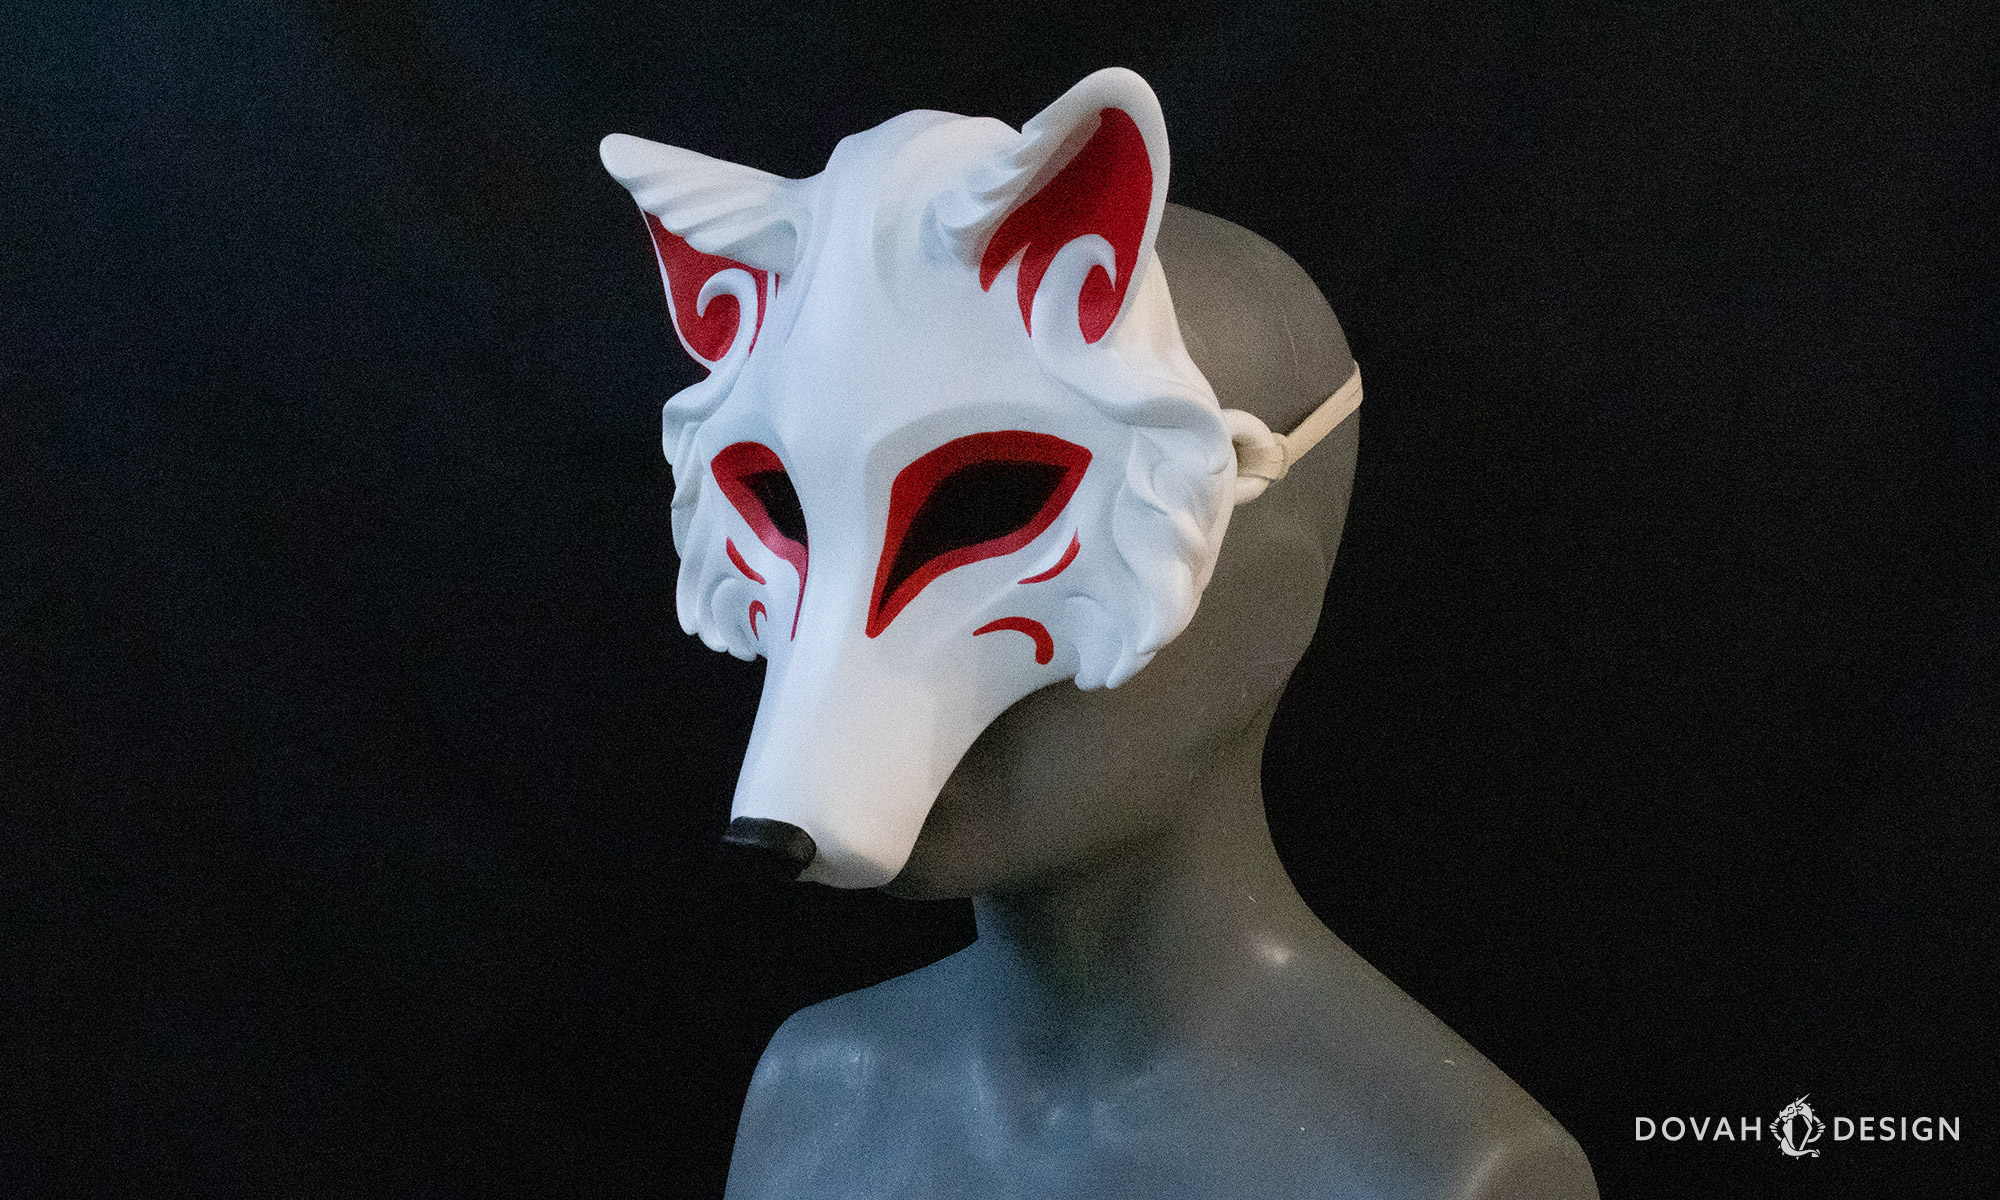 Side angle view of a white wolf mask painted in the Japanese Kistune-style with red eye and facial designs and a black nose, posed on a mannequin.